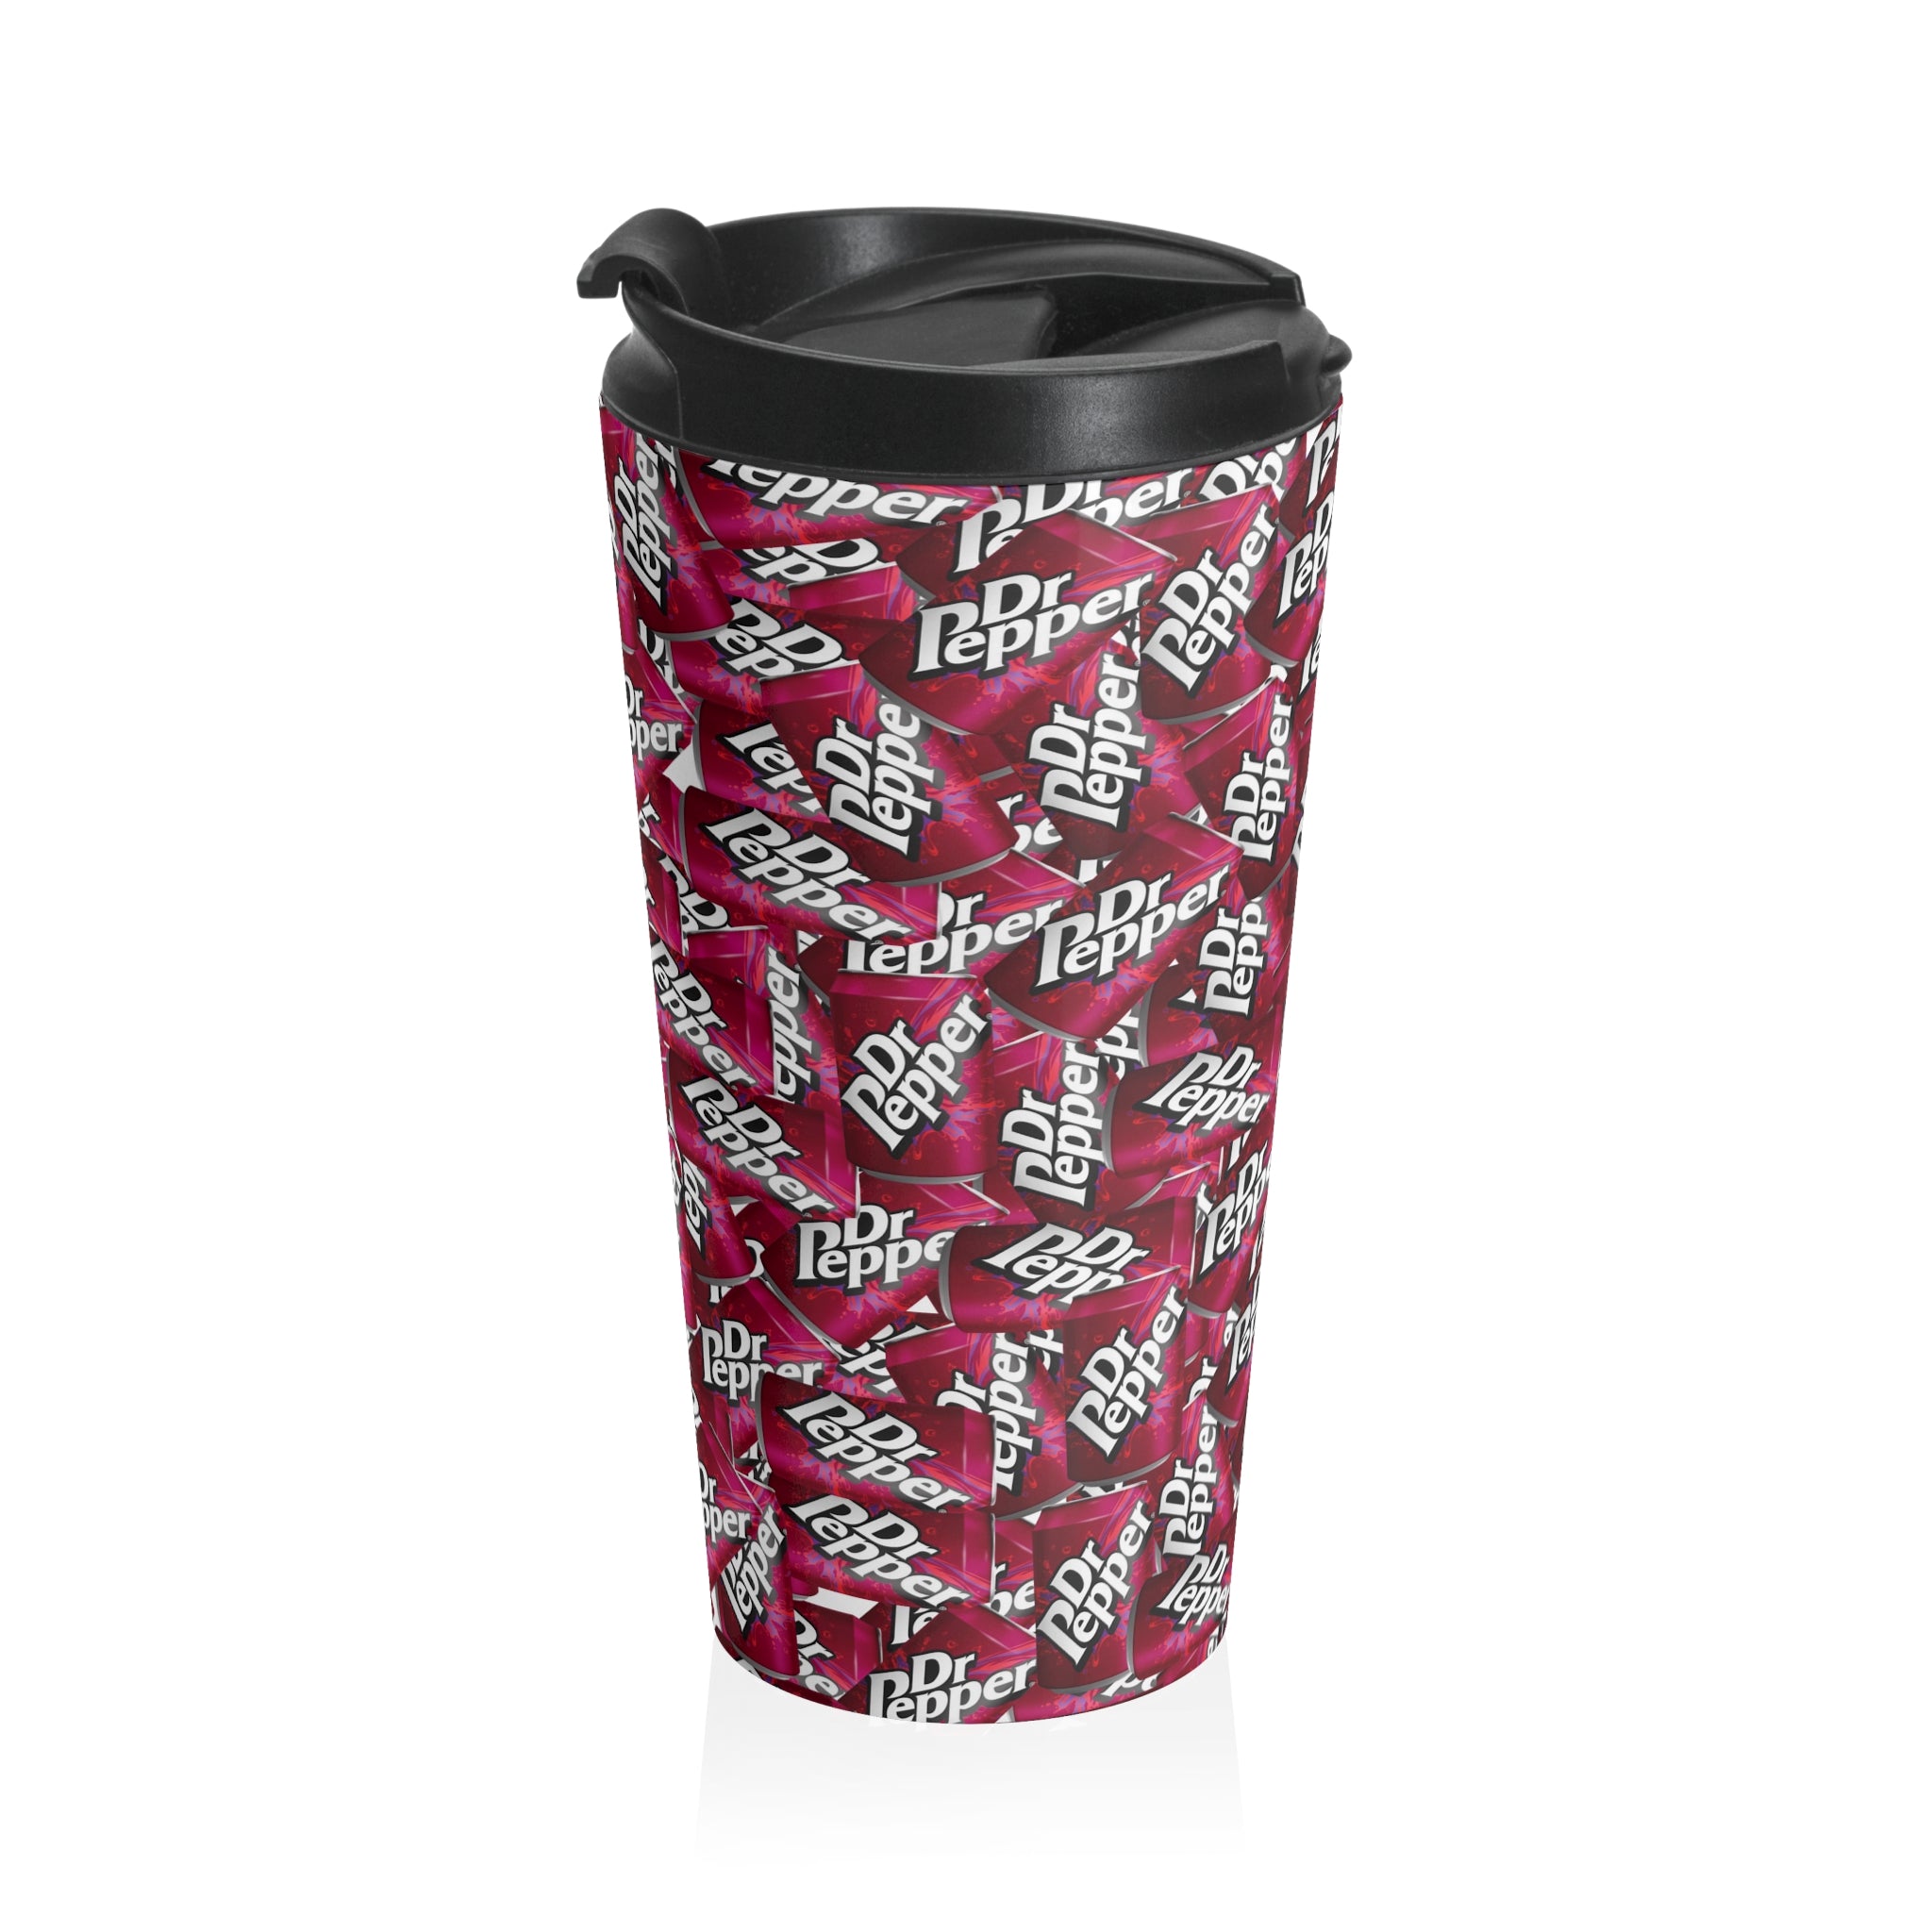 Dr Pepper canned Pattern Stainless Steel Travel Mug